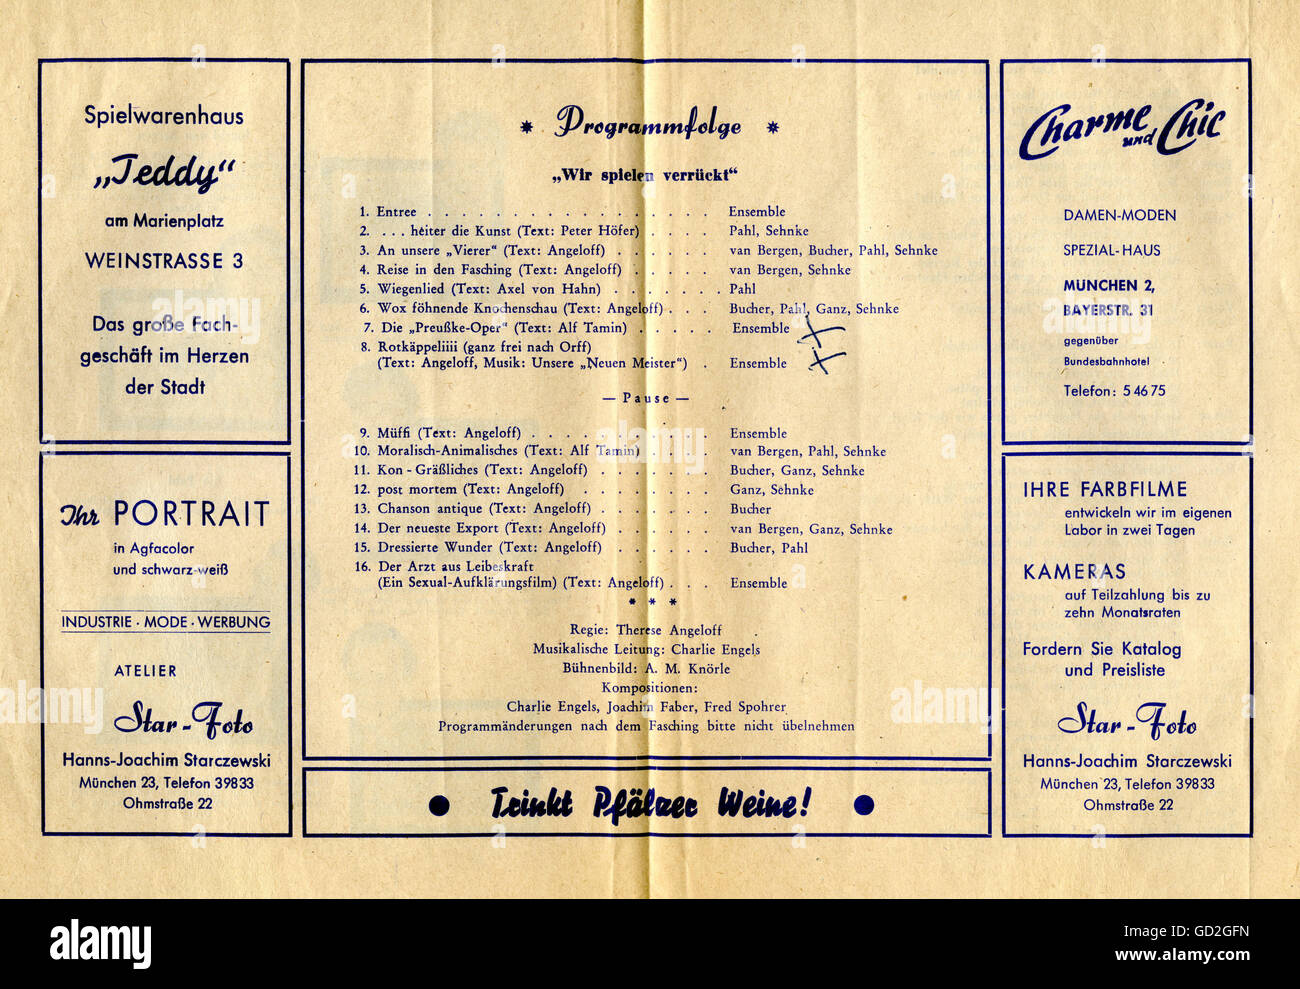 theatre / theater, cabaret, 'Die kleinen Fische' (The little fishes), 'Wir spielen verrückt' (We are going crazy), playbill, inside, program sequence, print: Georg Jakob, Munich, Germany, 1950s, Additional-Rights-Clearences-Not Available Stock Photo